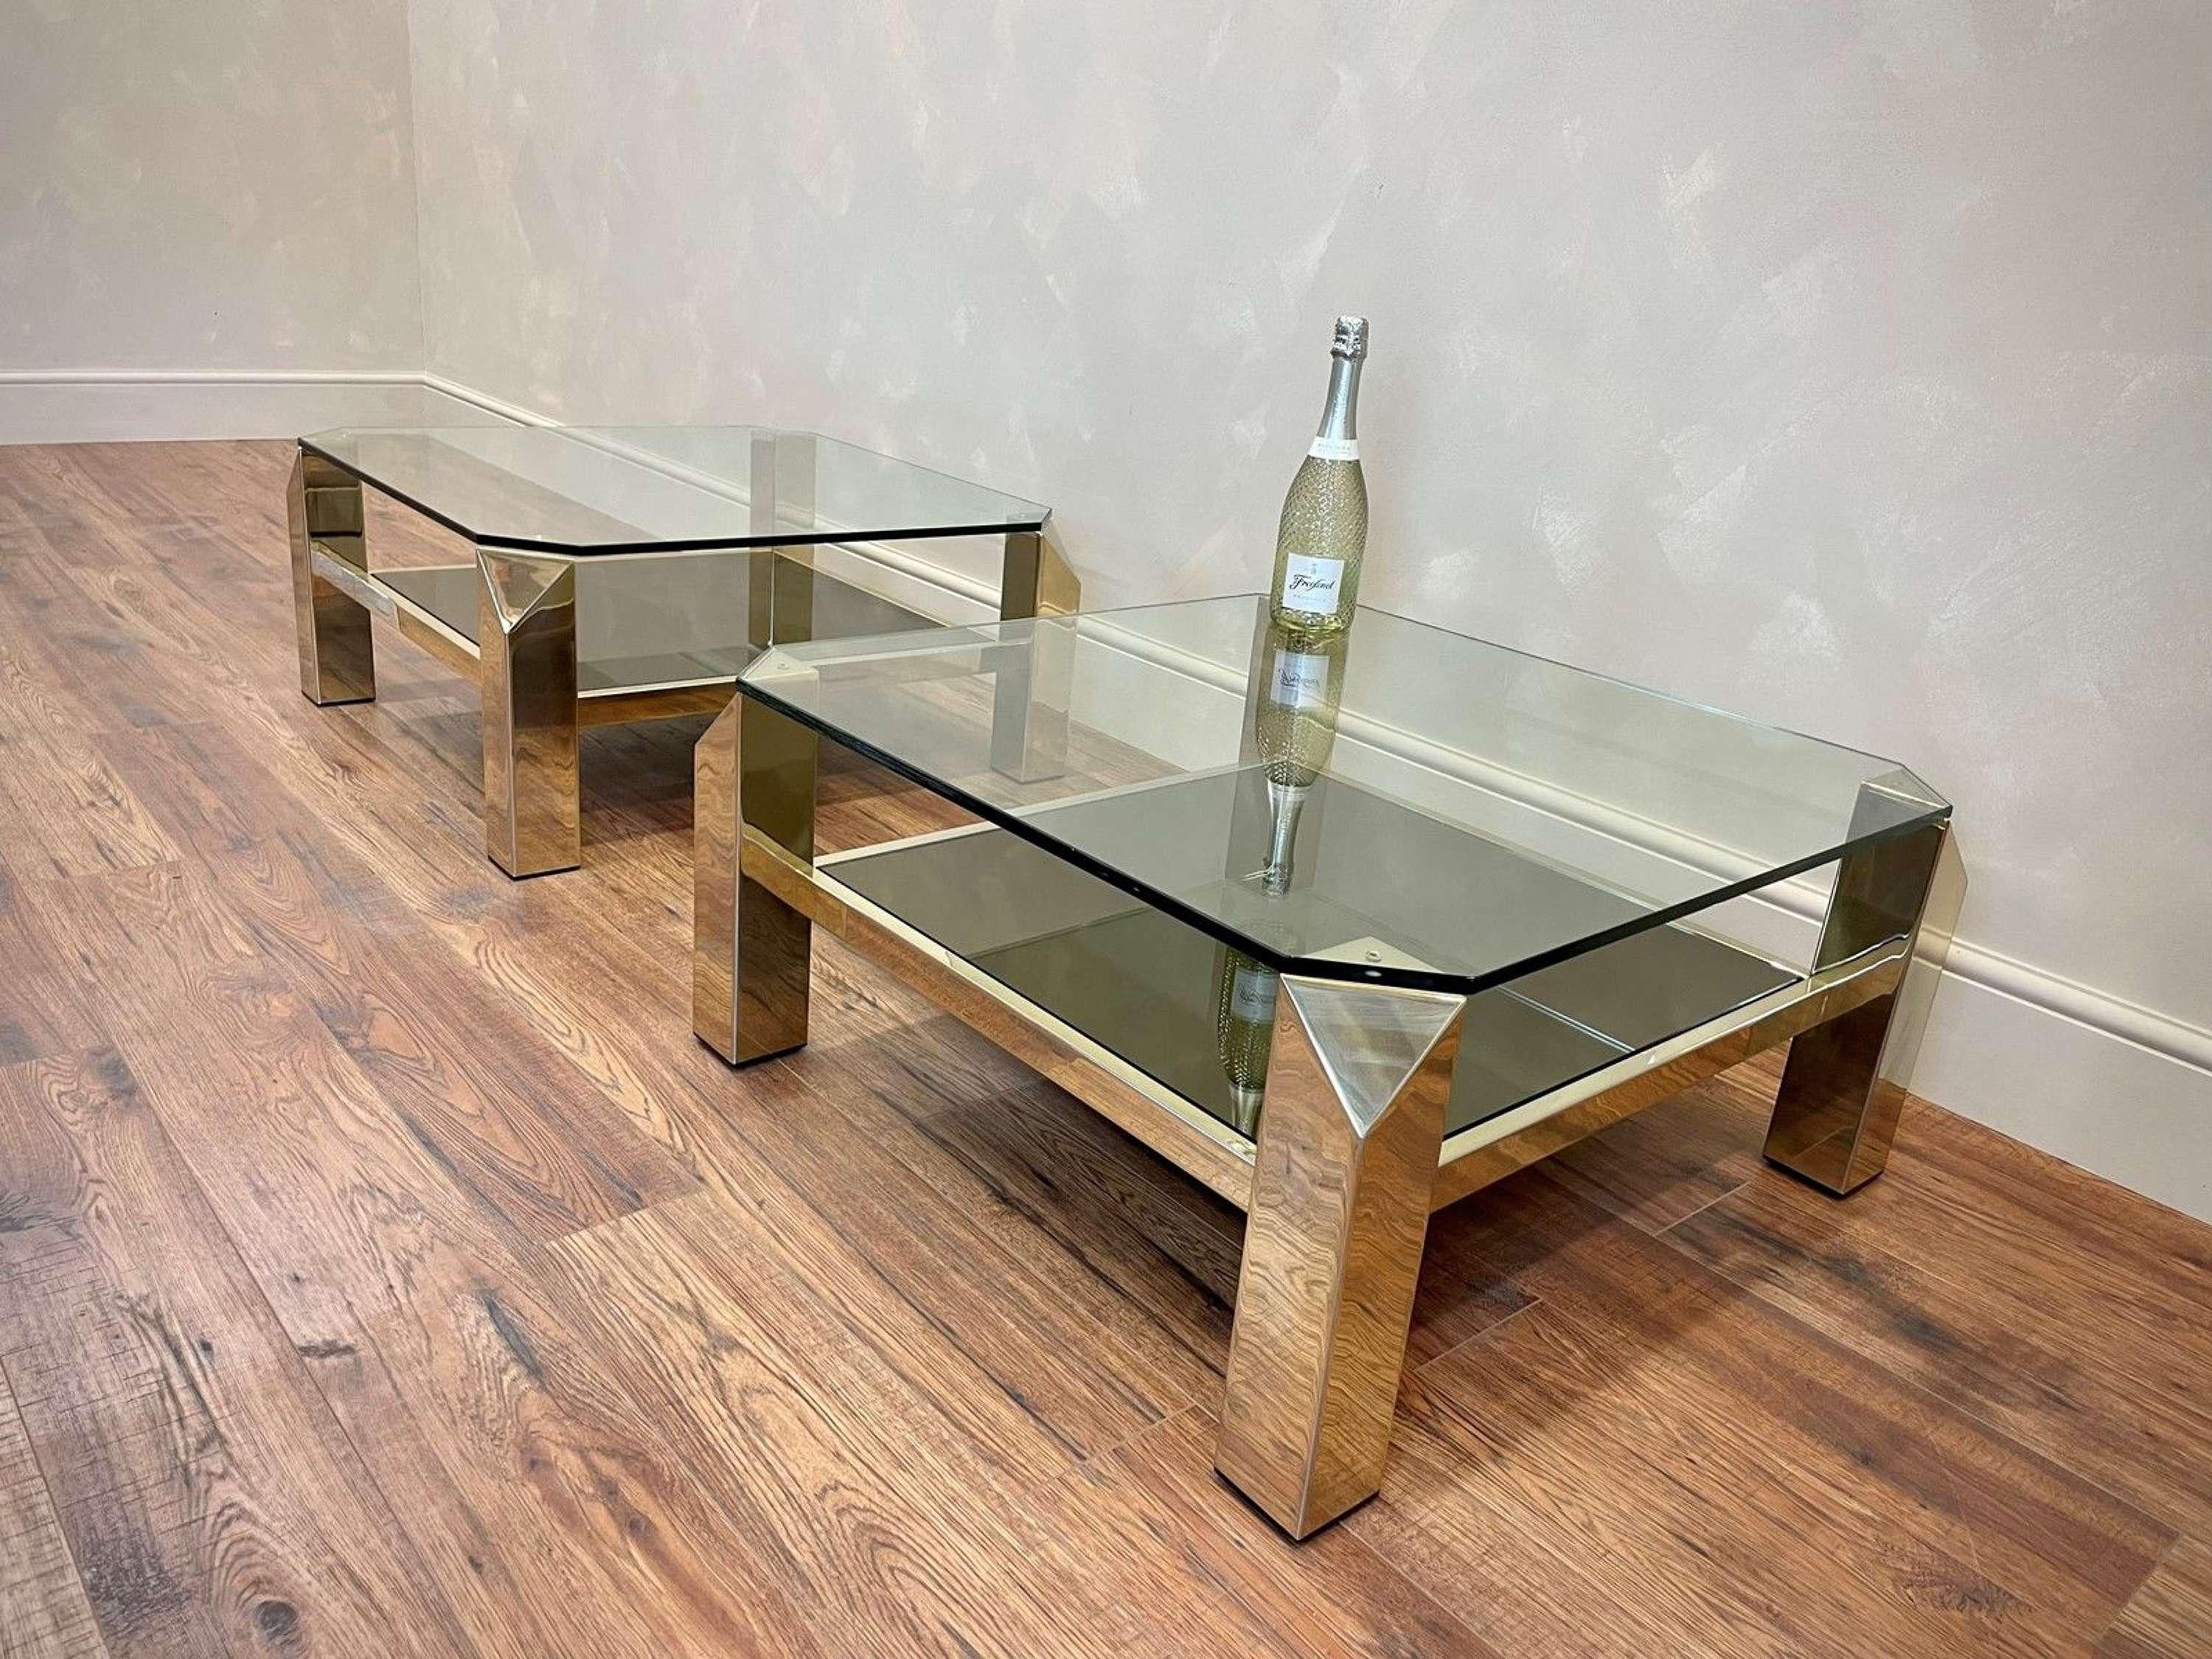 Stunning pair of 23ct gold plated, Hollywood Regency, large scale coffee tables.
By Belgo Chrome, circa 1970. Stamped.
Belgo chrome is famous for its quality products in brass or gold-plated metal, often in the Hollywood Regency style.
Unique